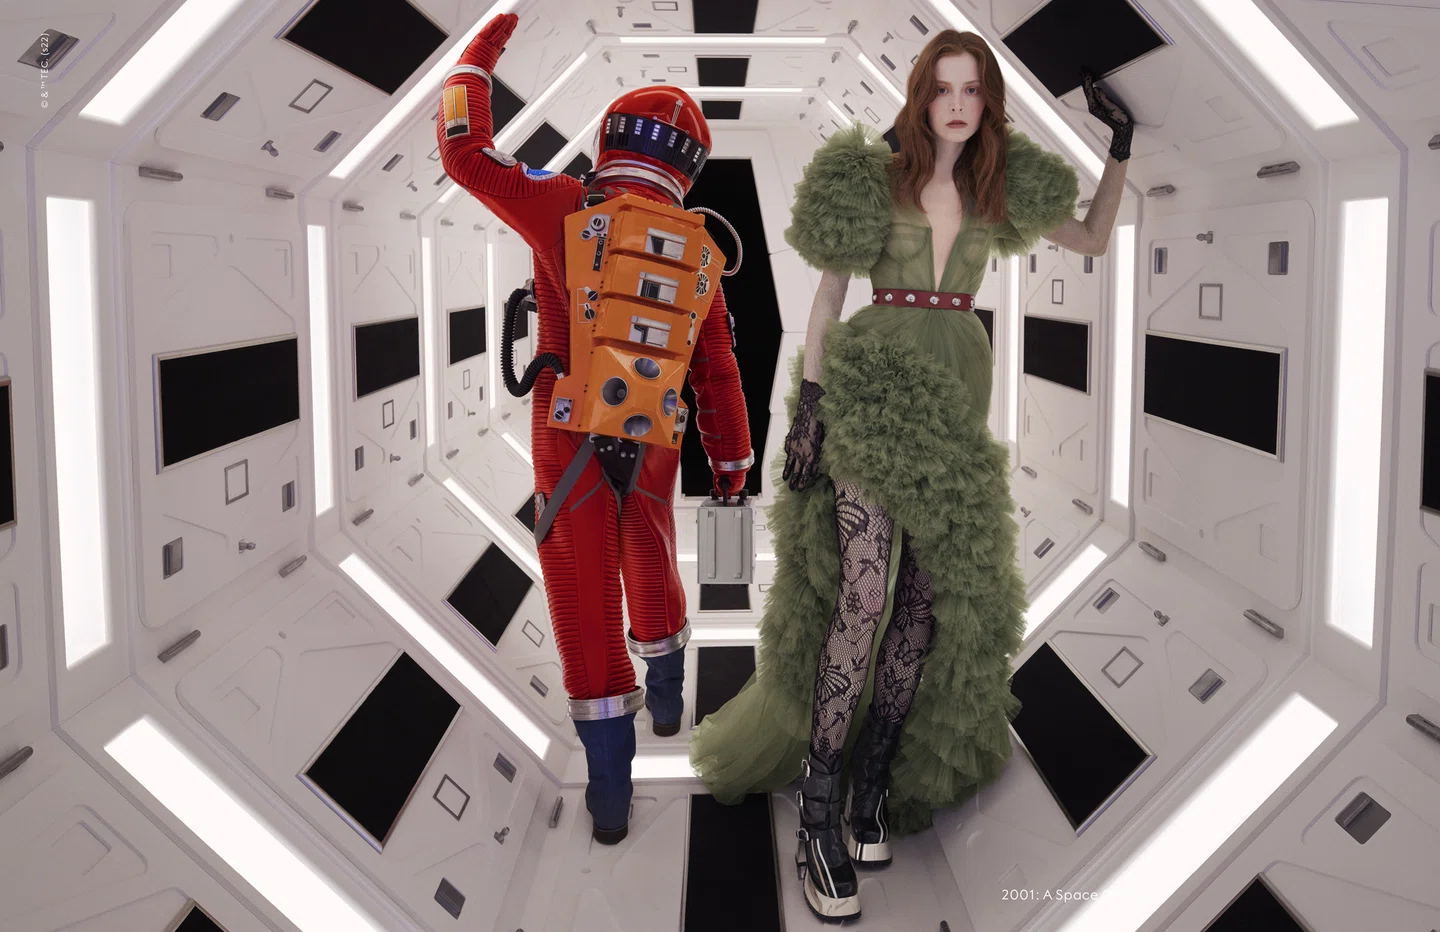 In Droga5's Vestiaire Collective campaign, the clothes become the